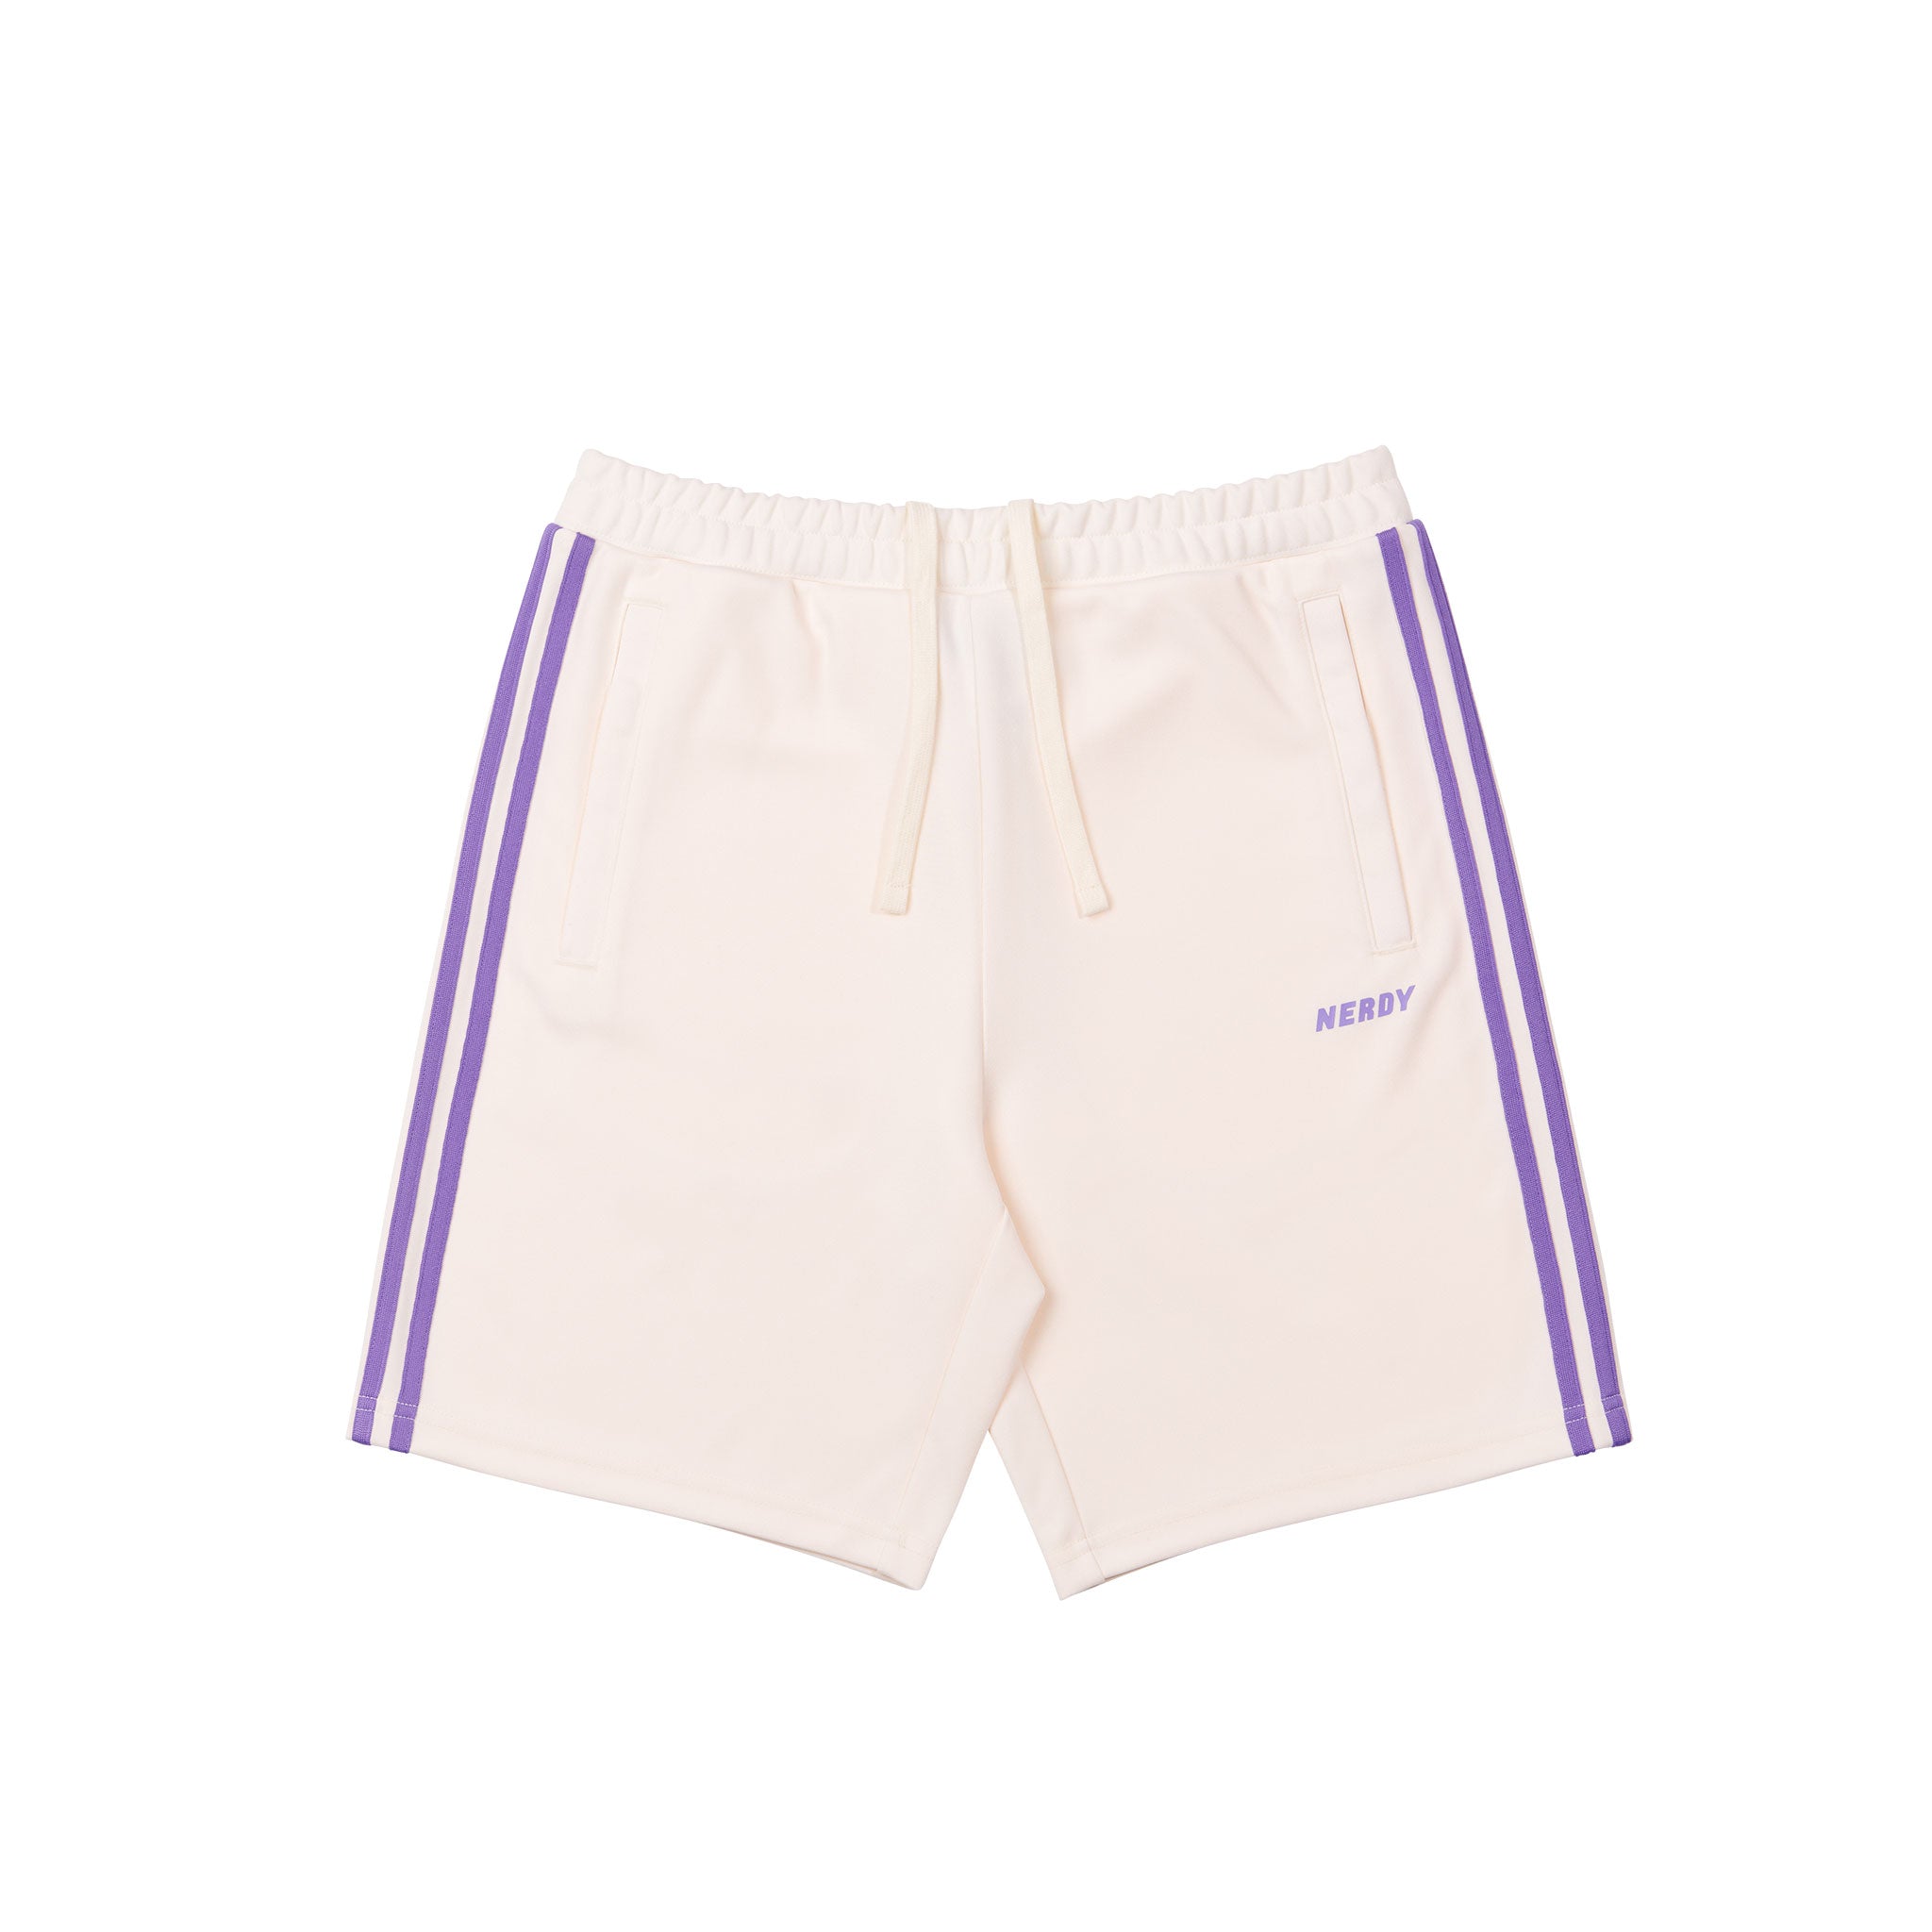 Half Pants Shorts Photos and Images | Shutterstock